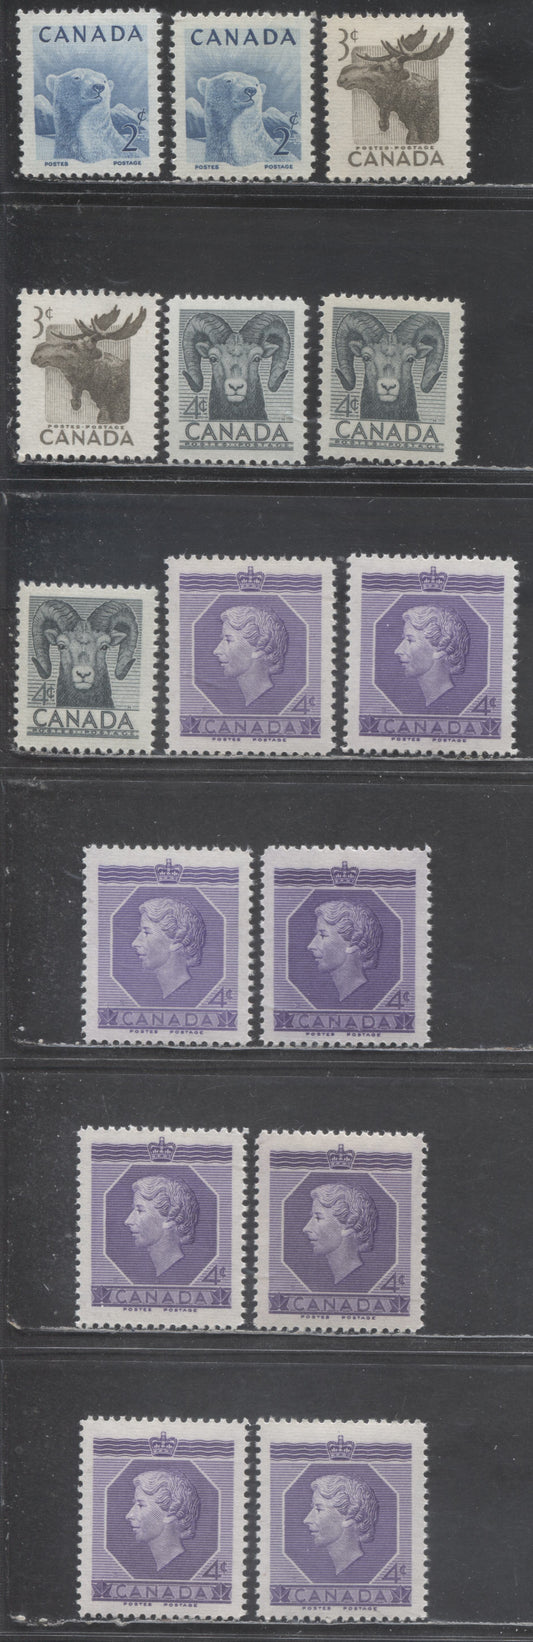 Lot 399 Canada #322-324, 330 2c-4c Various Colours Various Subjects, 1951-1953 Royal Visit Issue - 1953 Coronation Issue, 15 VFNH Singles, Smooth & Horiziontally Ribbed Papers, Many Shades Cream & Yellowish Cream Semi-Gloss Gum